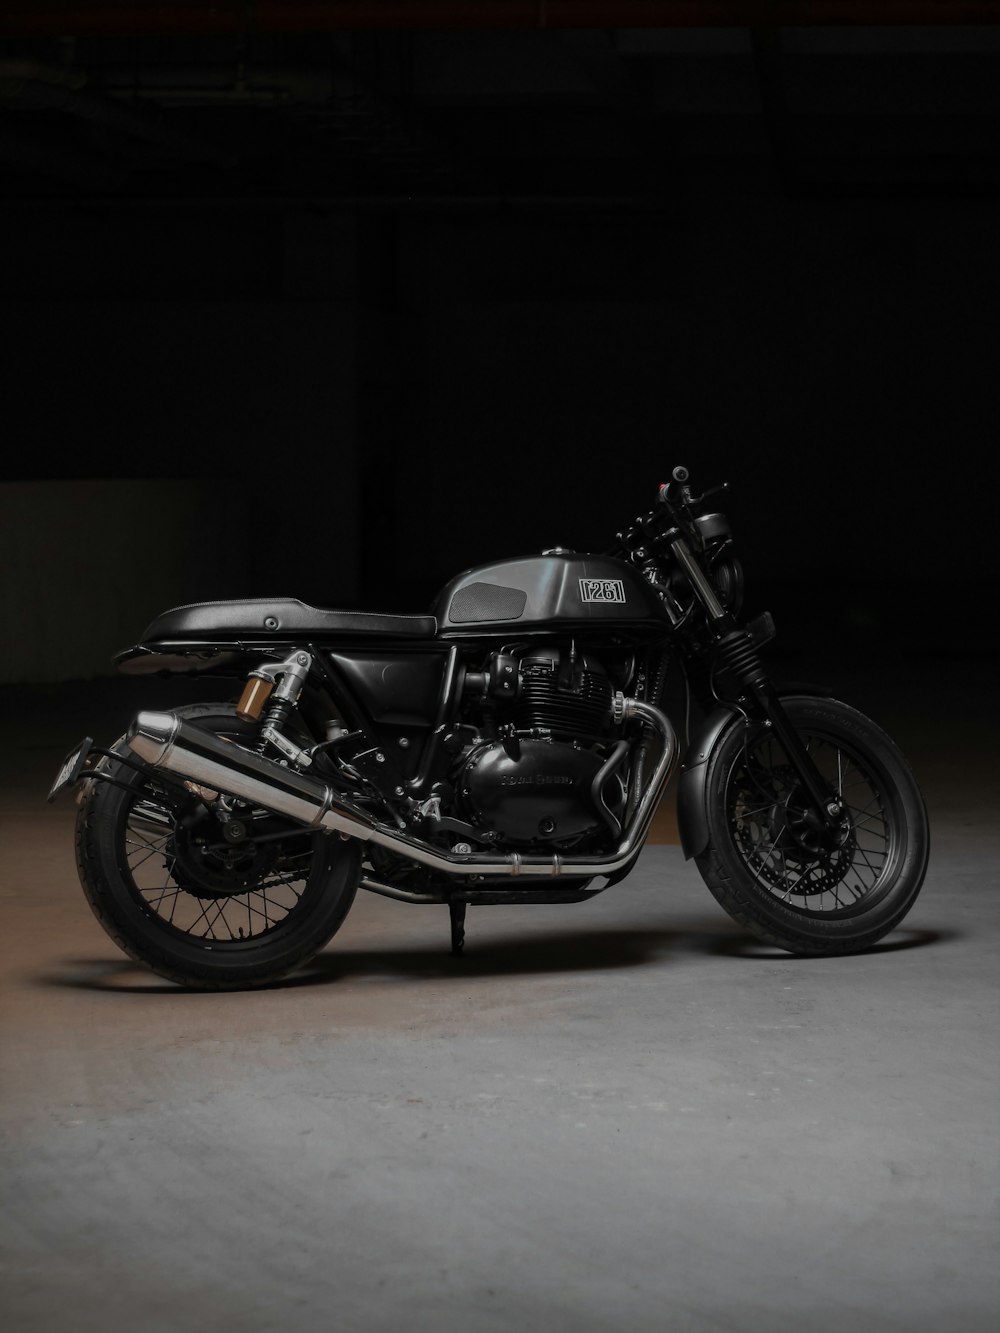 a black motorcycle parked in a dark room